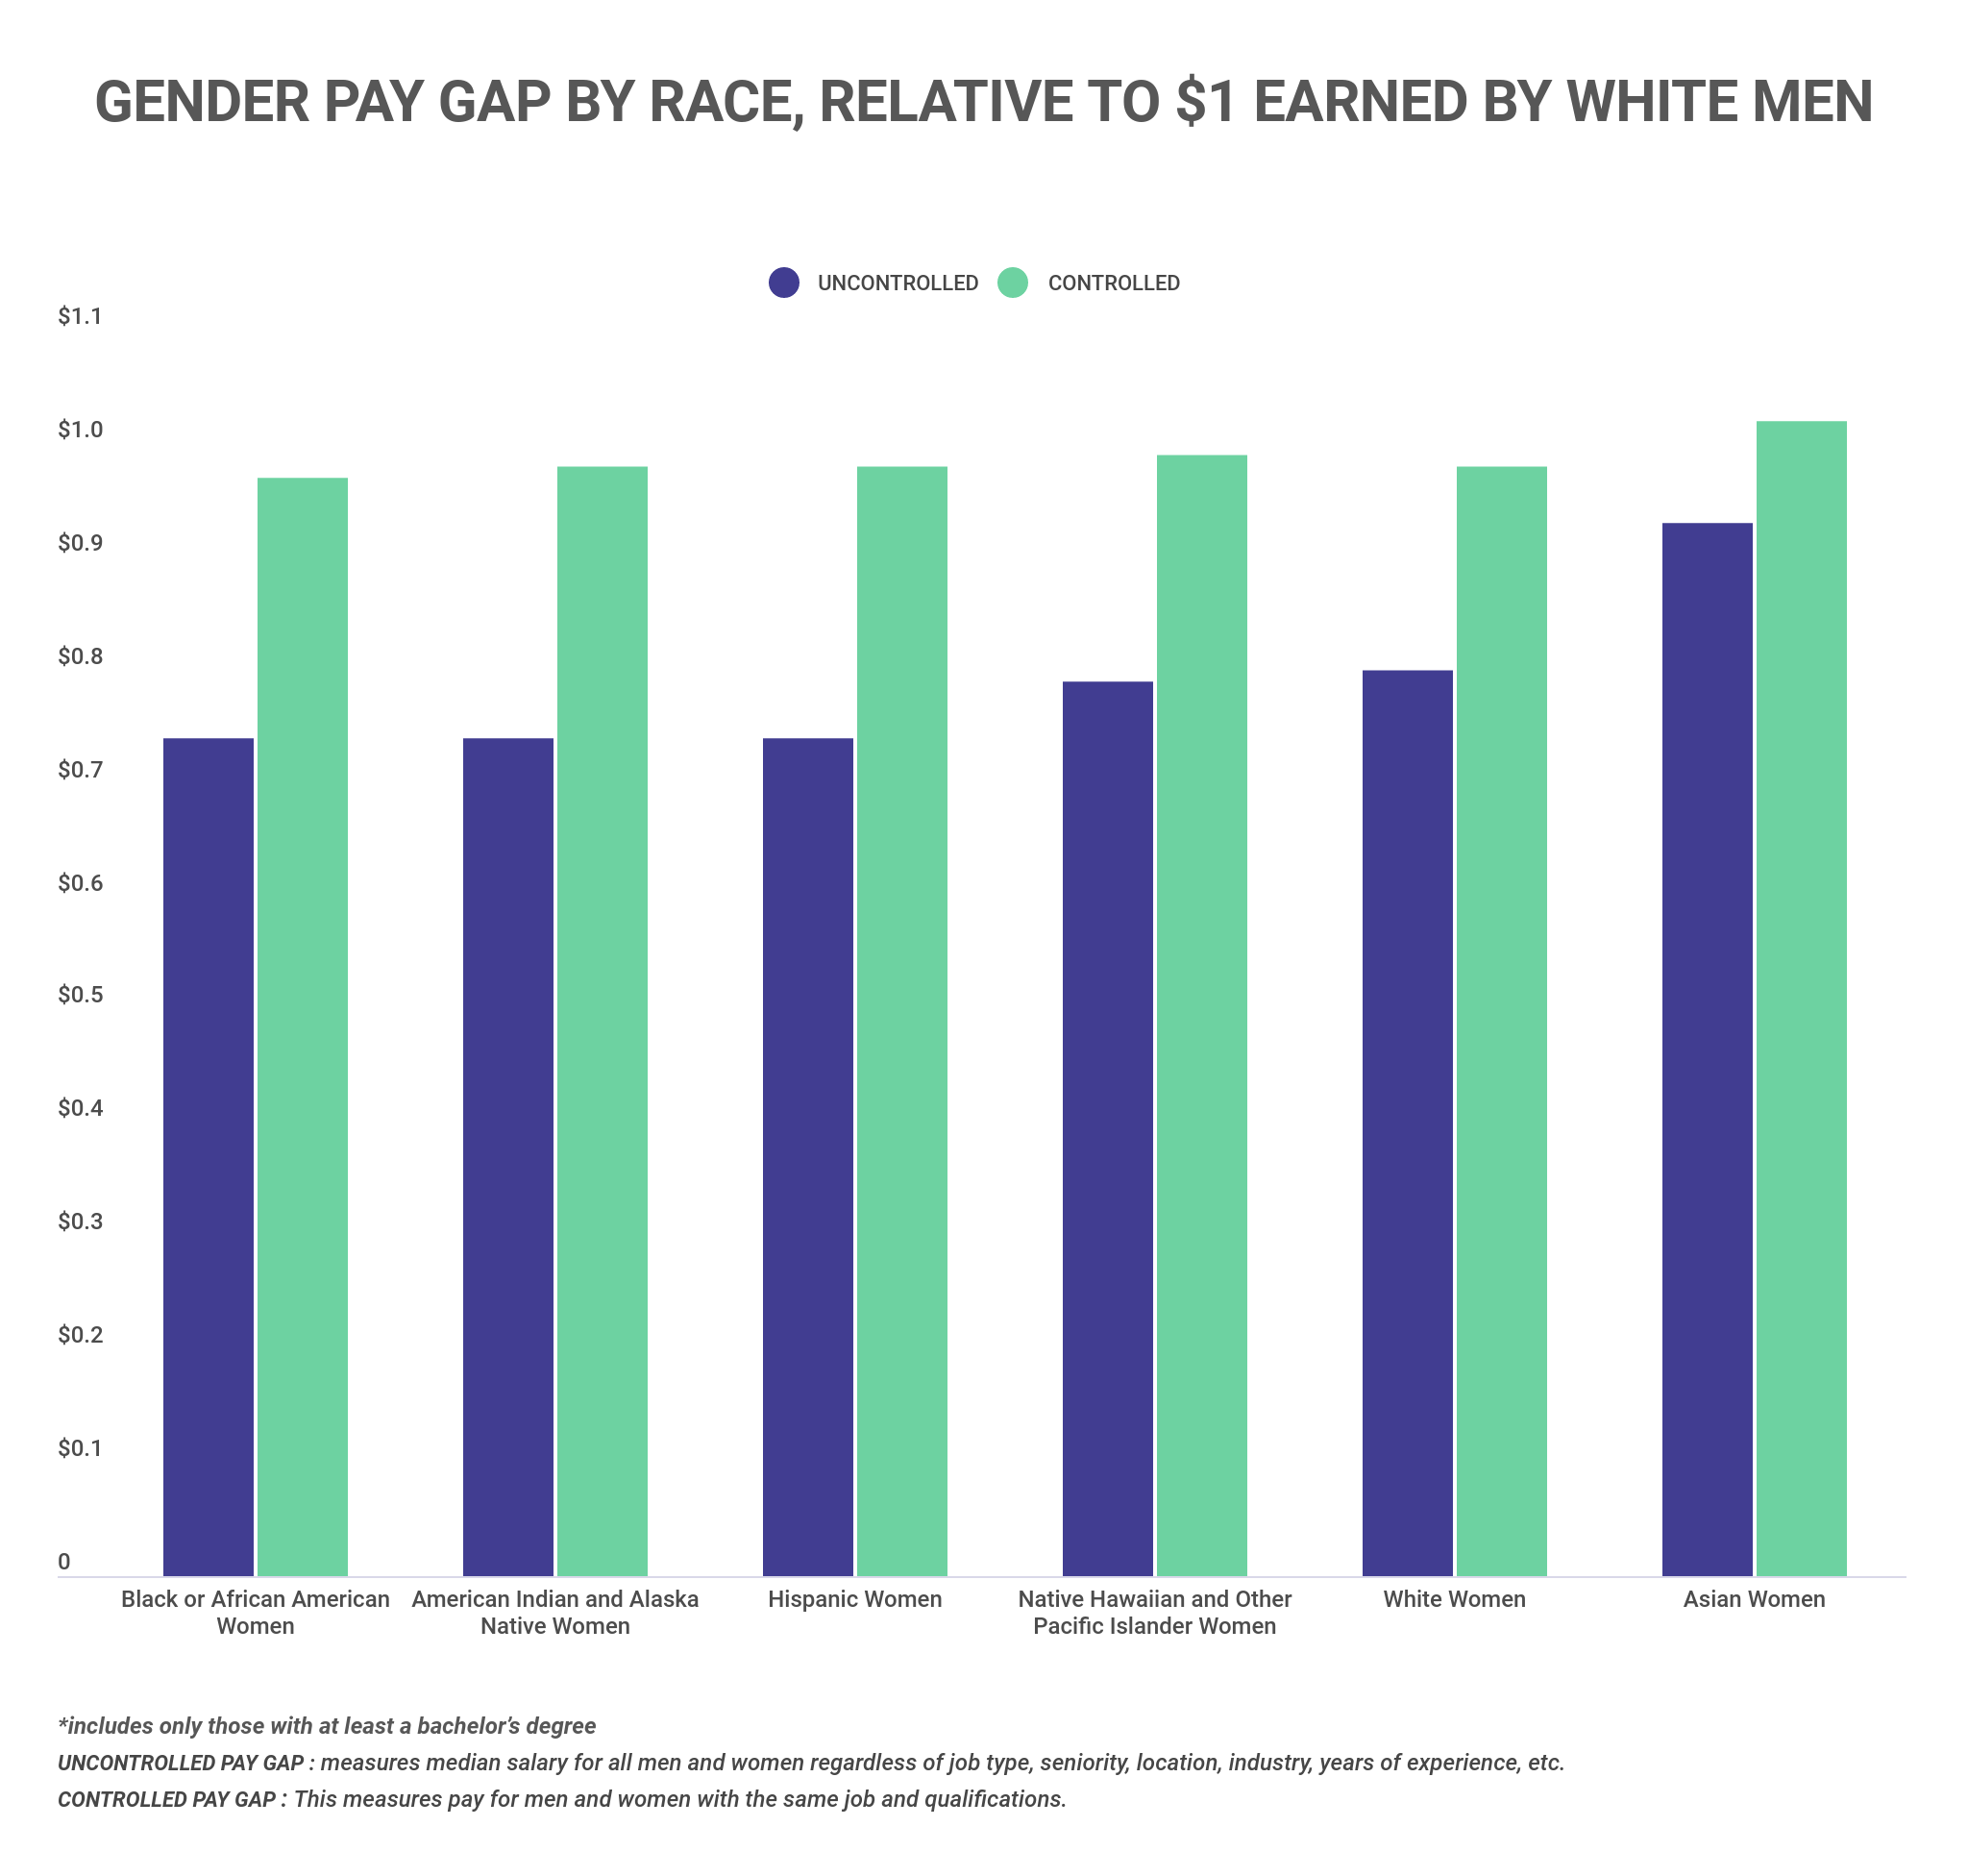 New Research Reveals Unequal Access to High Paying Jobs is at the Root of the Gender Pay Gap Problem